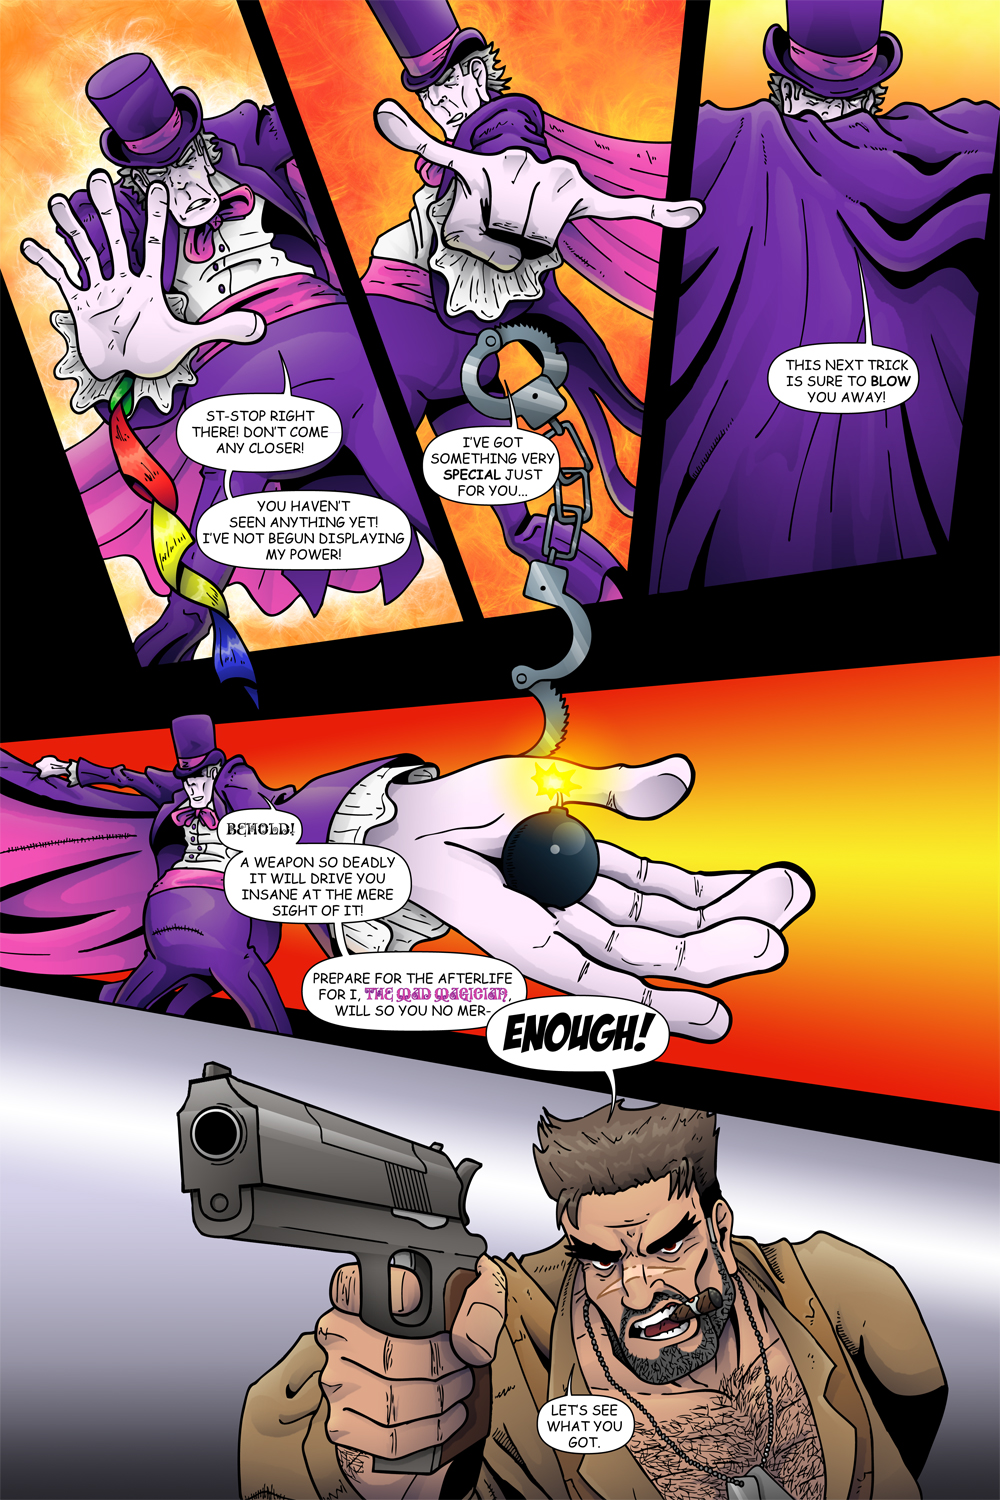 MISSION 008: PAGE 05 “BLOW YOU AWAY!”